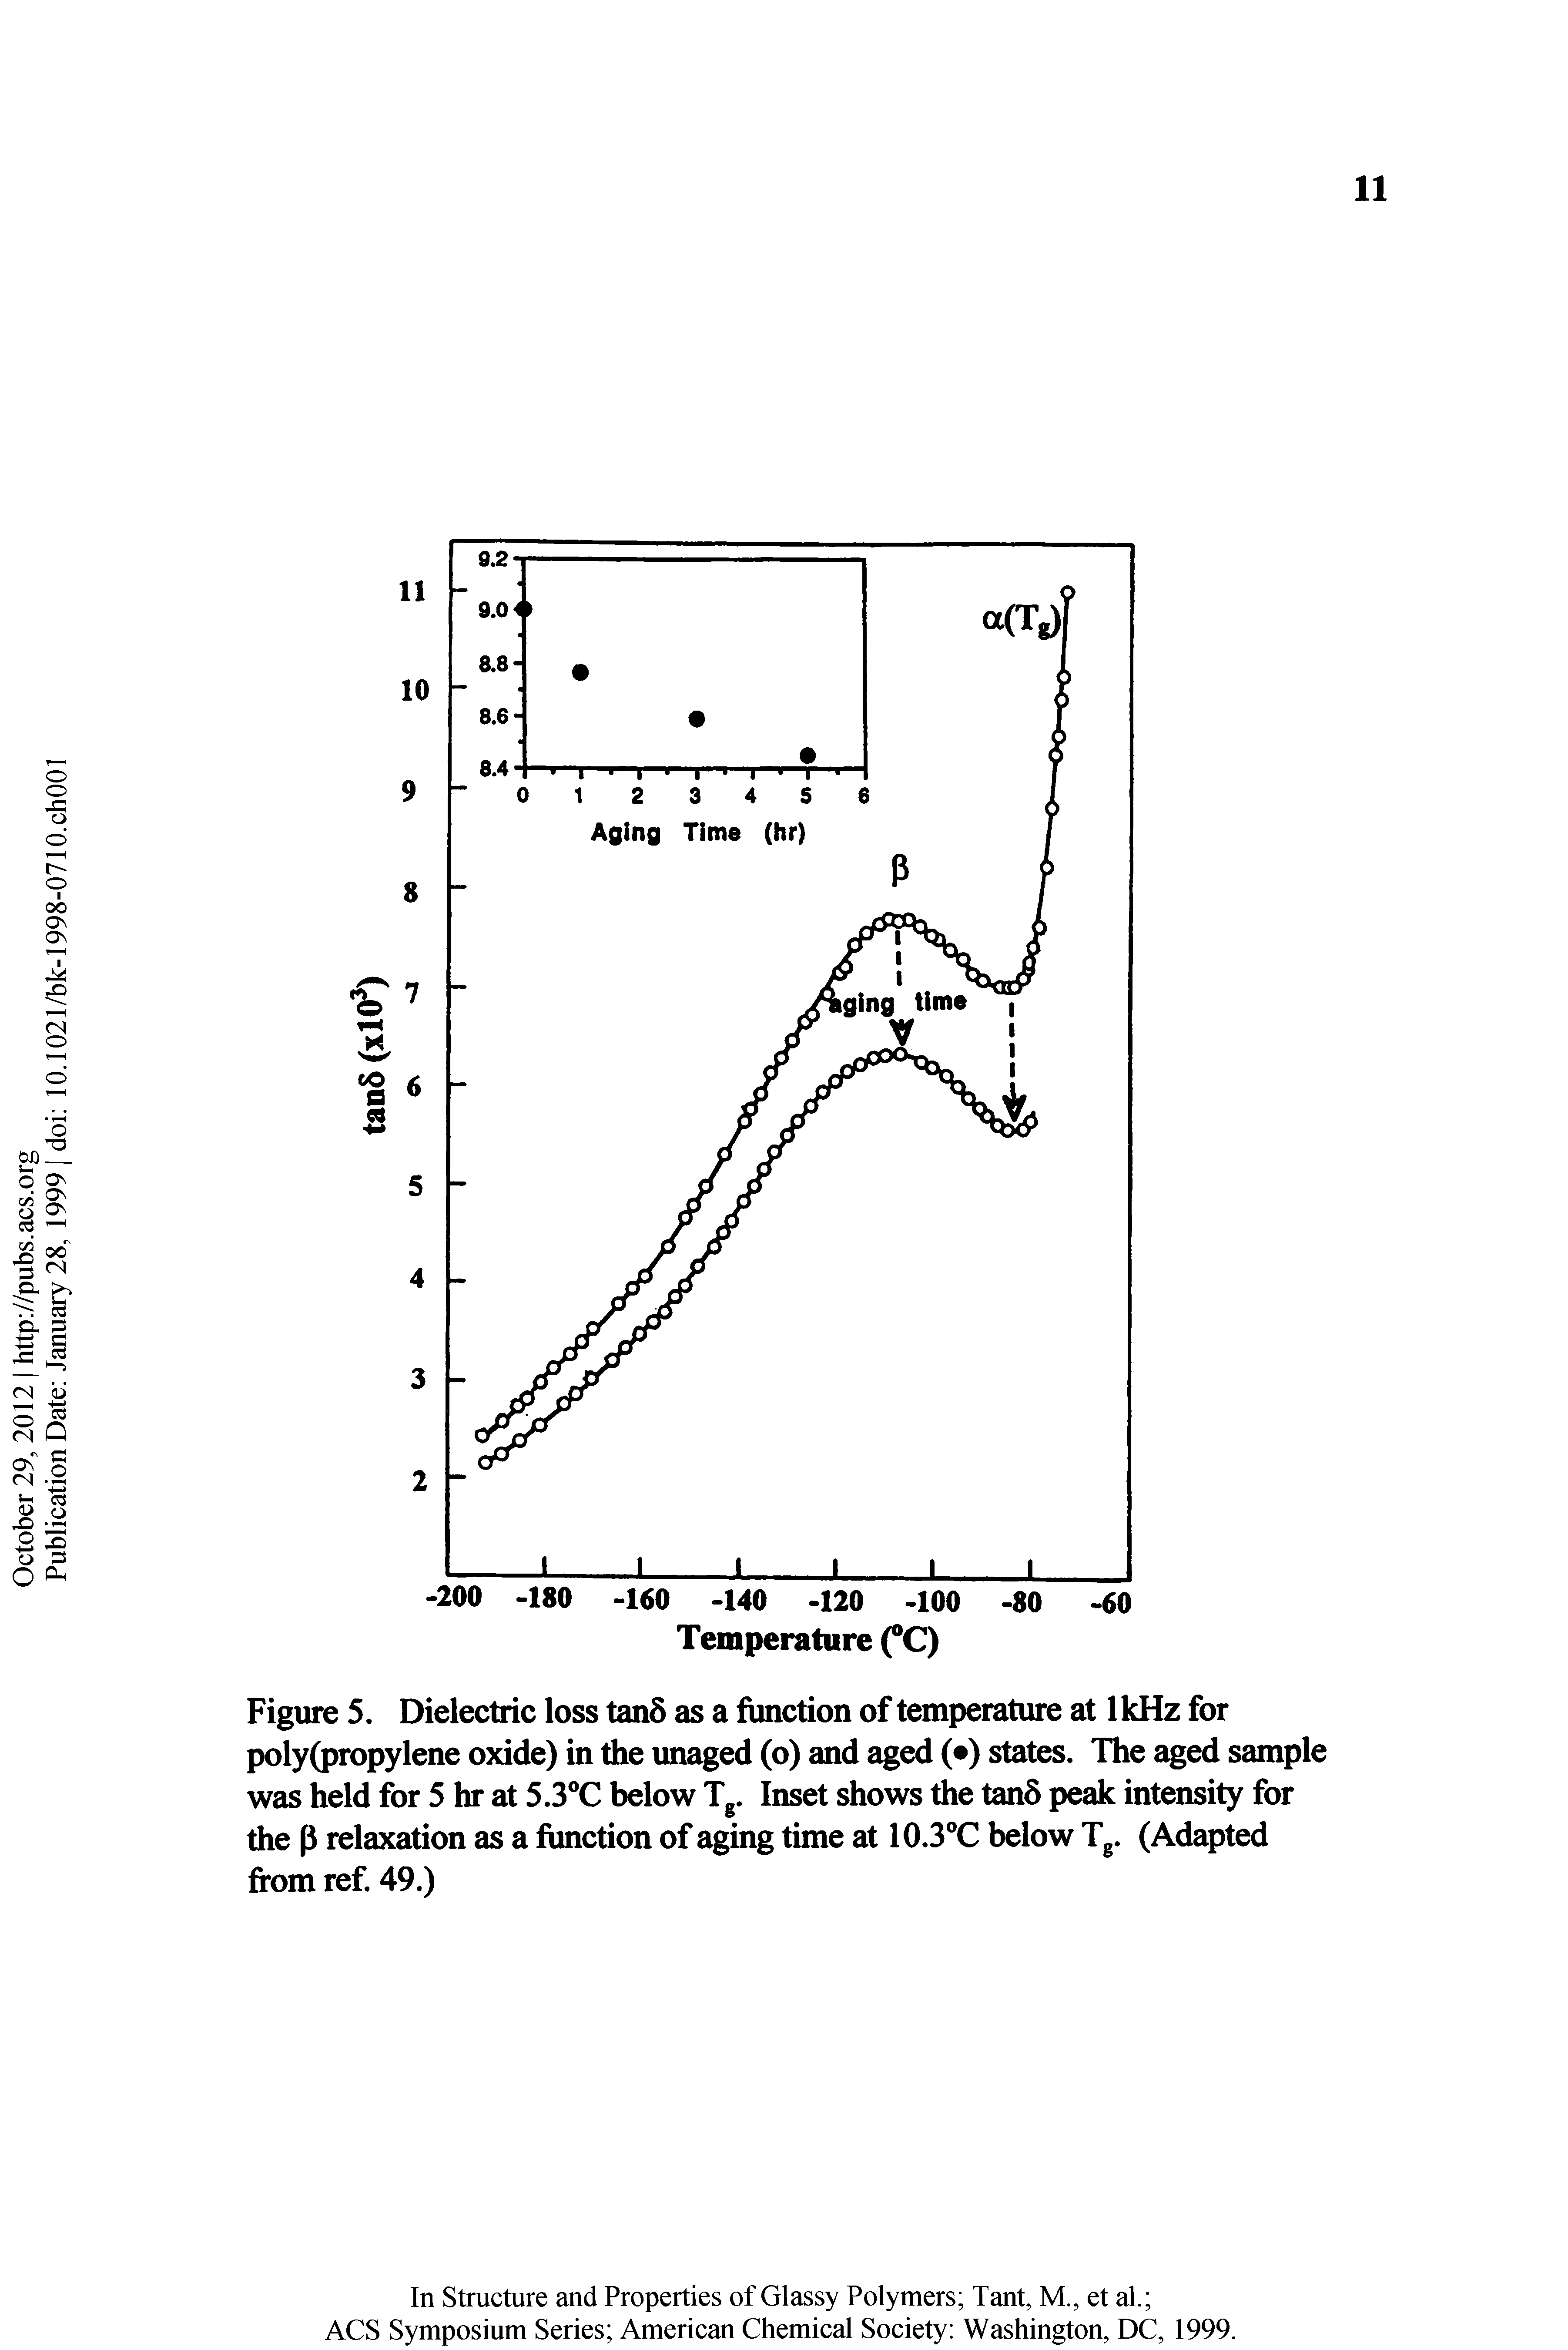 Figure 5. Dielectric loss tan8 as a function of temperature at IkHz for poly(propylene oxide) in the imaged (o) and aged ( ) states. The aged sample was held for 5 hr at 5.3 C below Tg. Inset shows the tan8 peak intensity for the P relaxation as a function of aging time at 10.3 C below Tg. (Adapted from ref. 49.)...